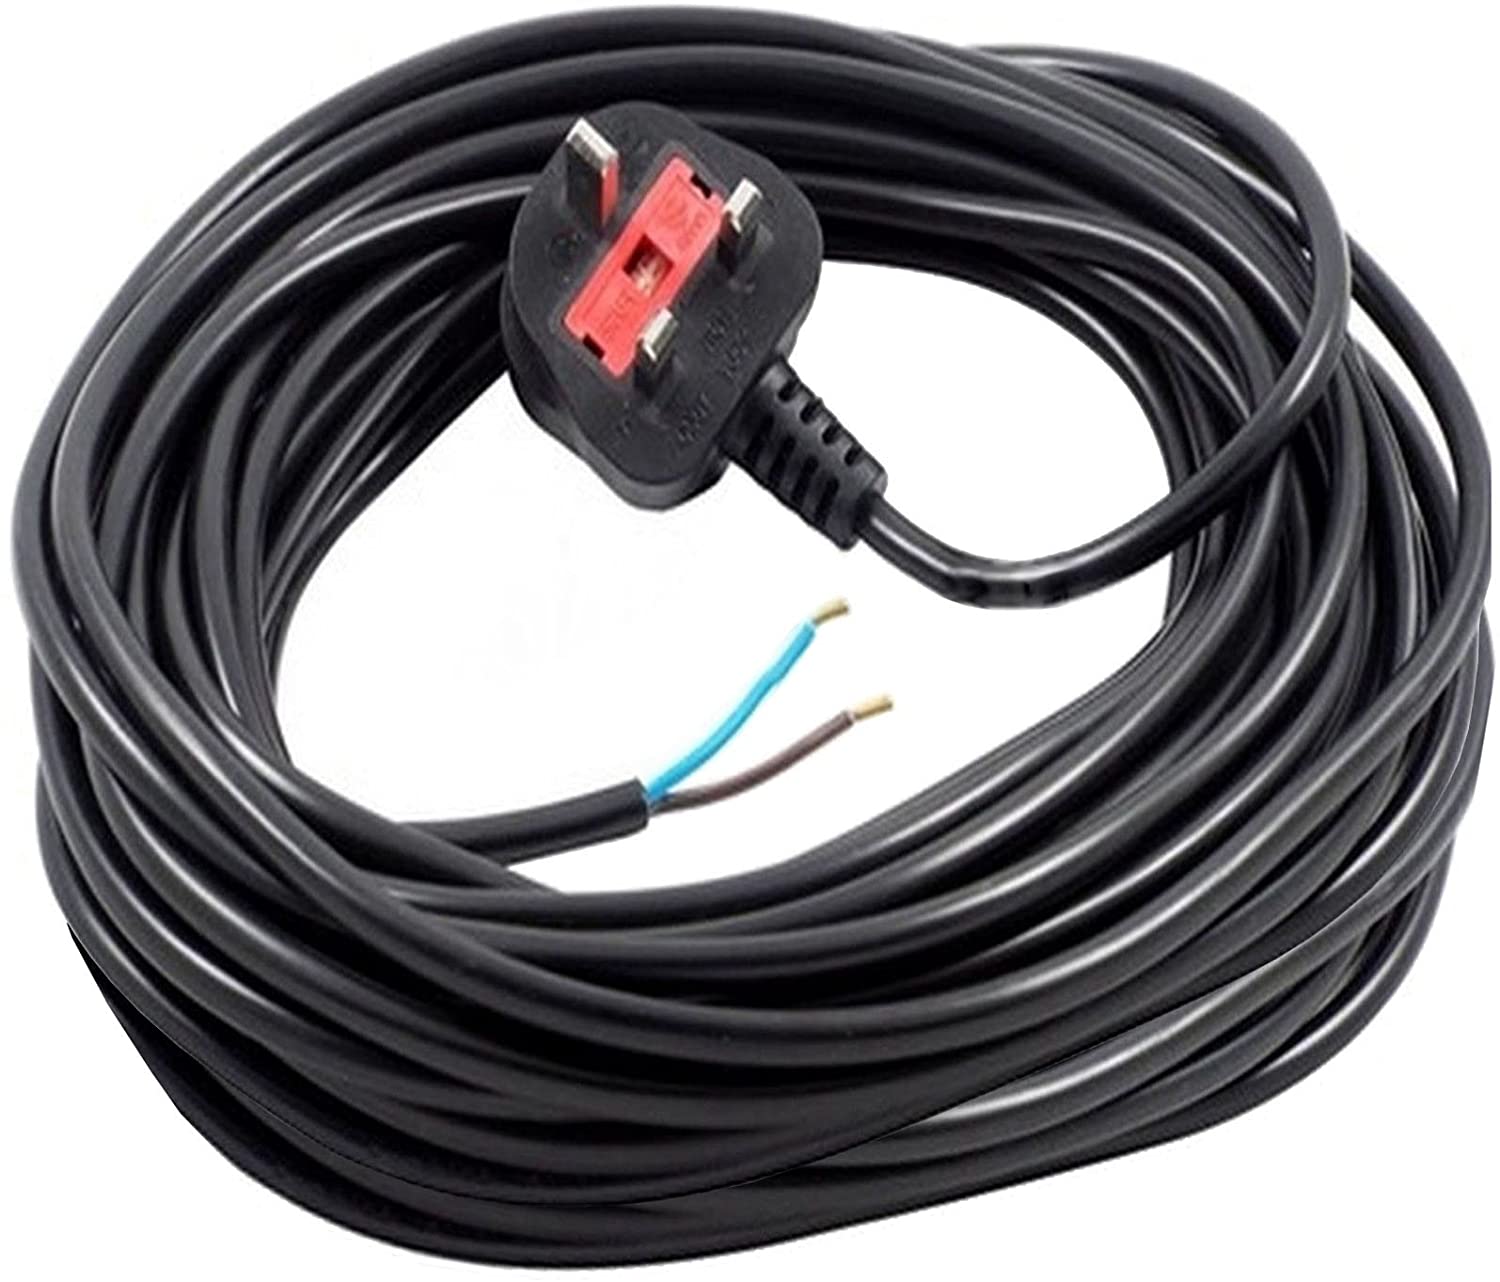 XL Extra Long 12M Metre Black Cable Mains Power Lead for Shark Vacuum Cleaner (UK Plug)